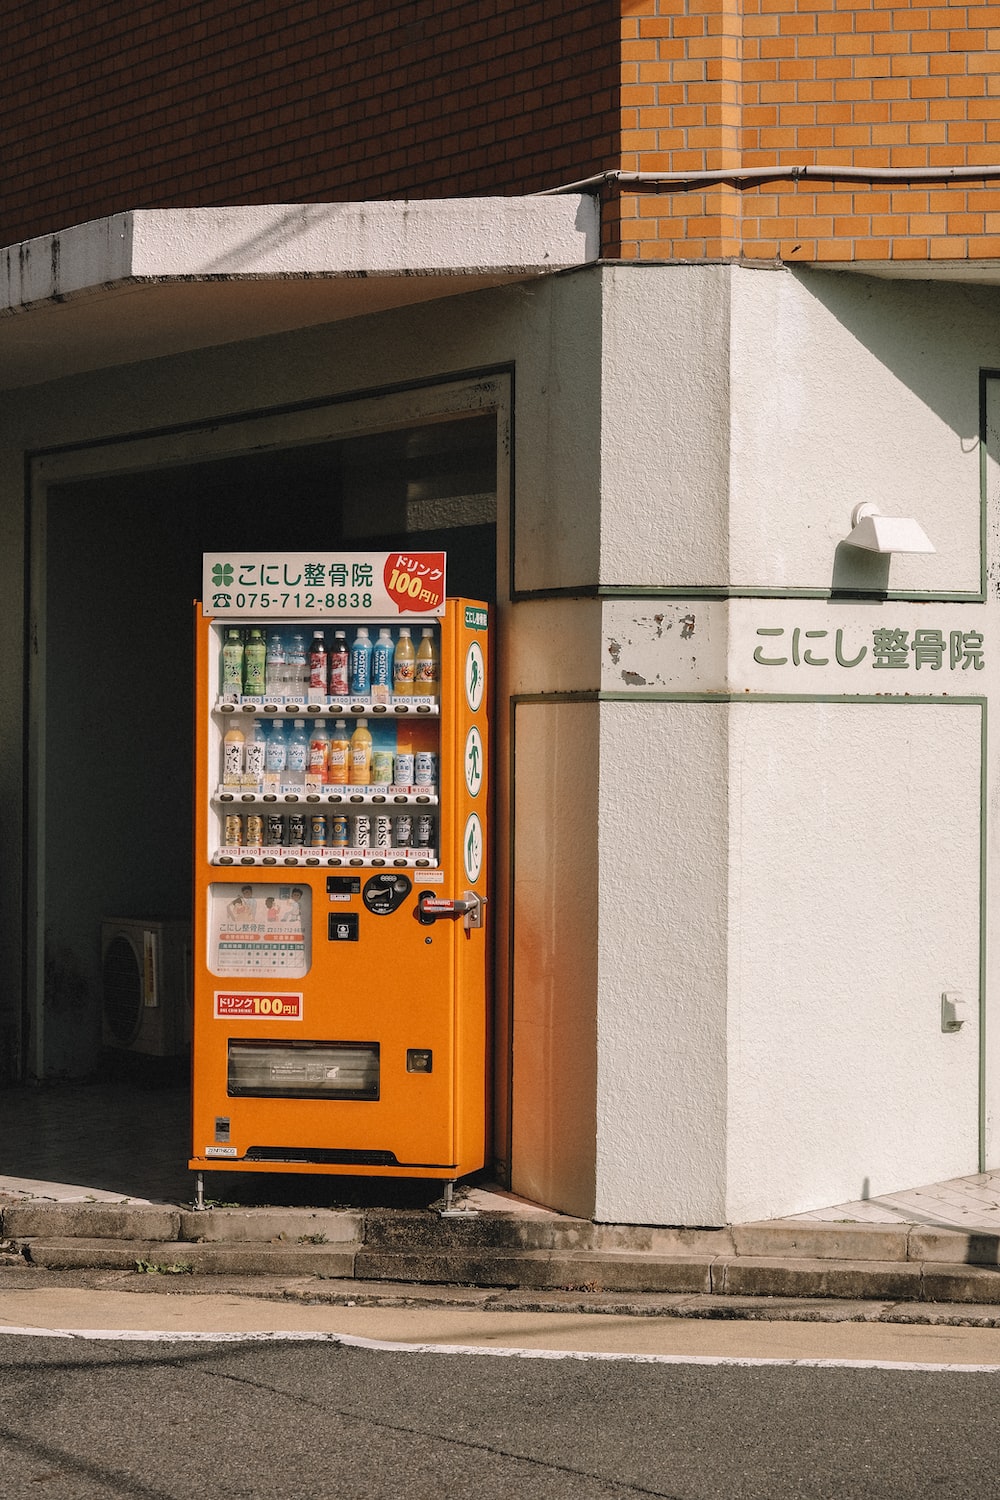 A vending machine is in front of an asian building - Japan